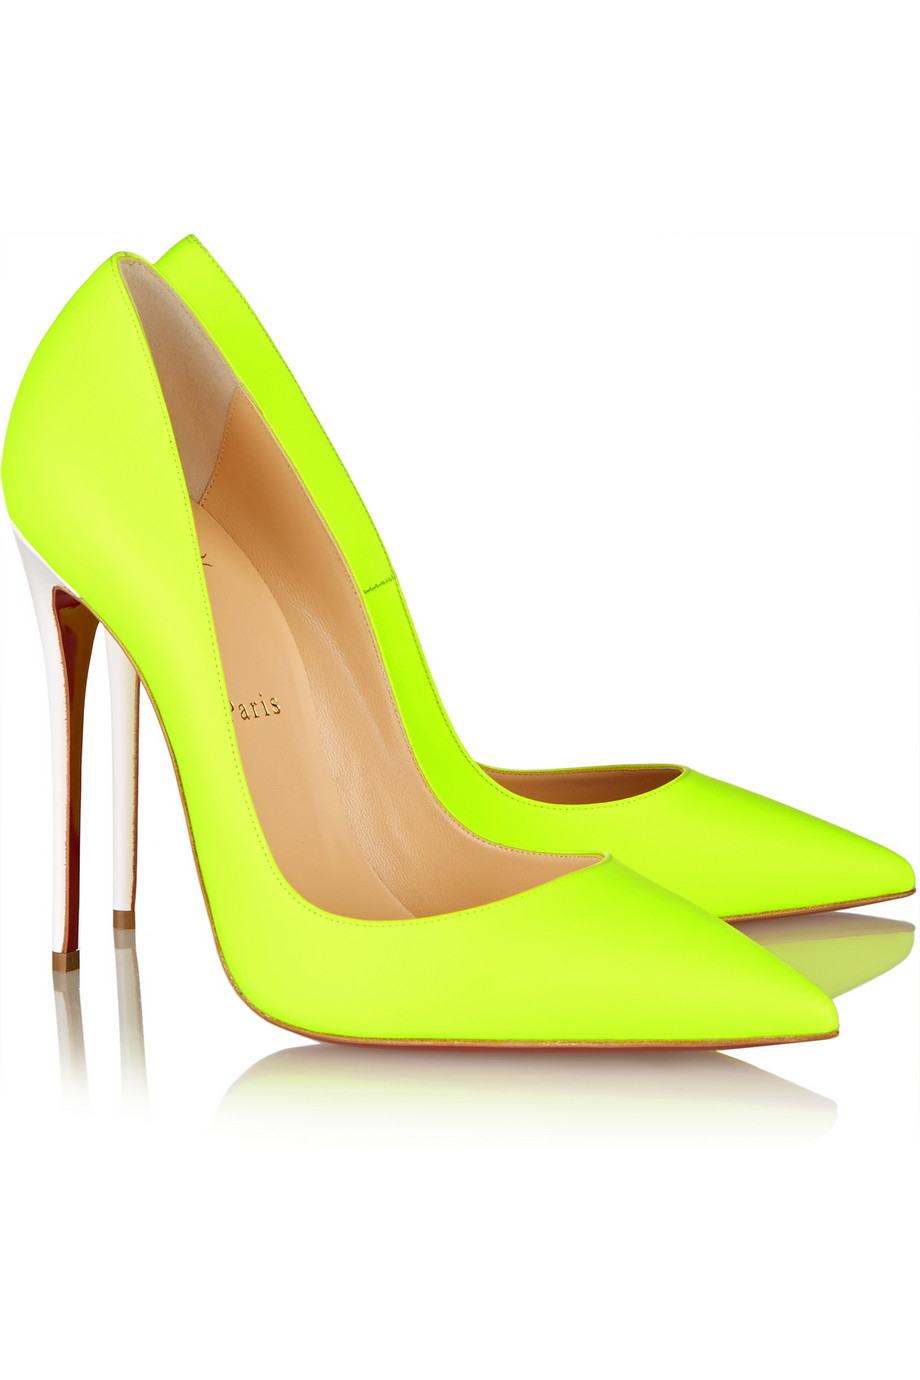 Christian Louboutin So Kate 120 Neon Leather Pumps in Yellow | Lyst